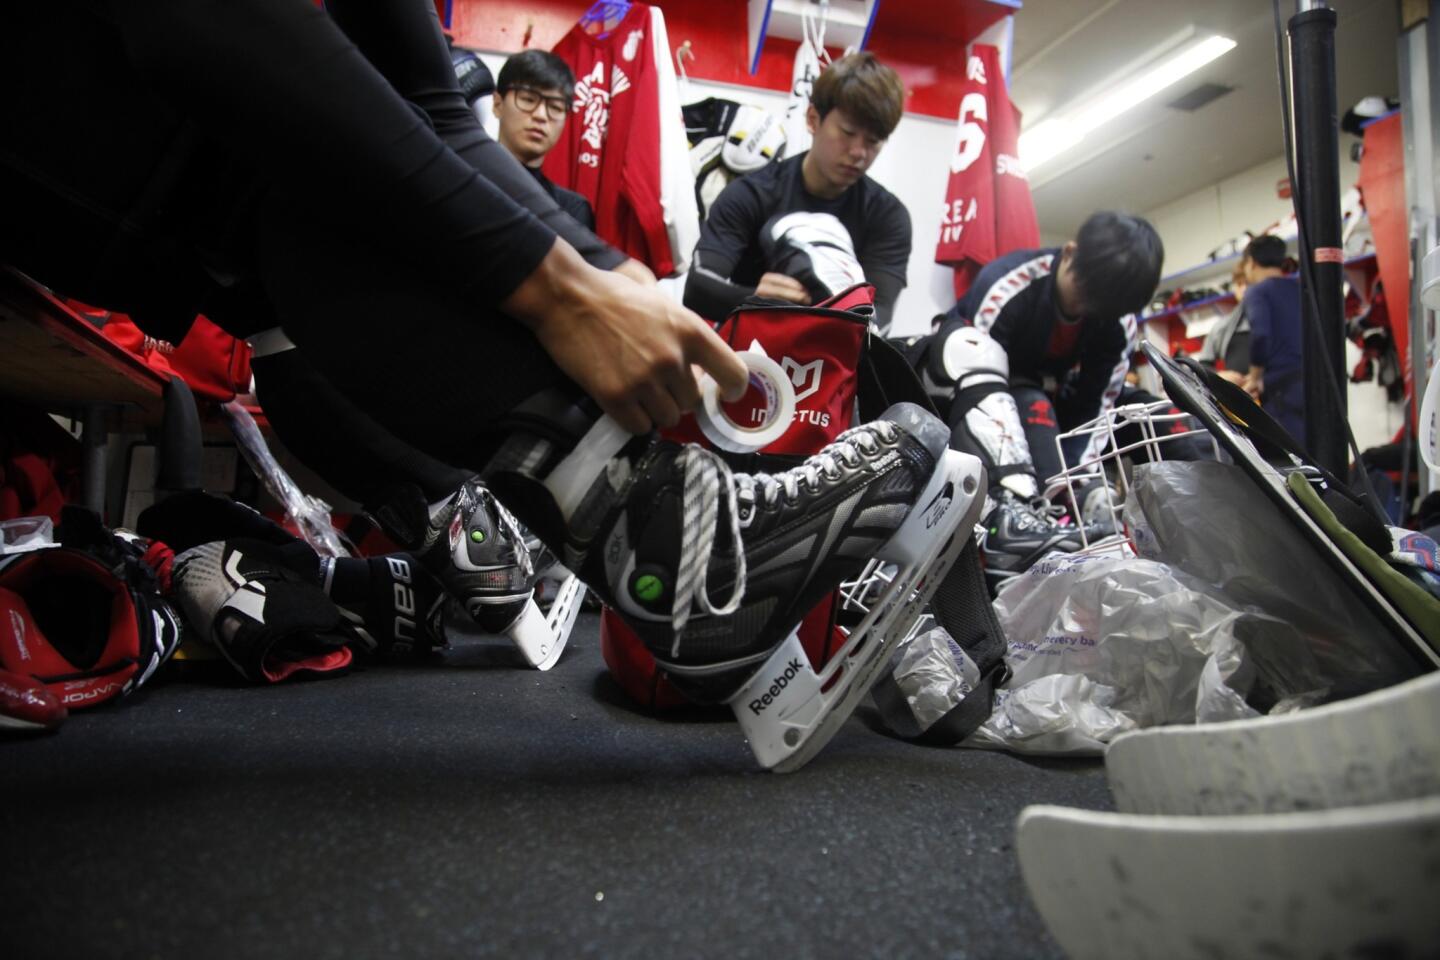 Hockey players from Korea University lace up their skates before taking part in a training session in Lakewood on July 30. The players are training in the United States to prepare for the 2018 Winter Olympic Games, which will be held in South Korea.